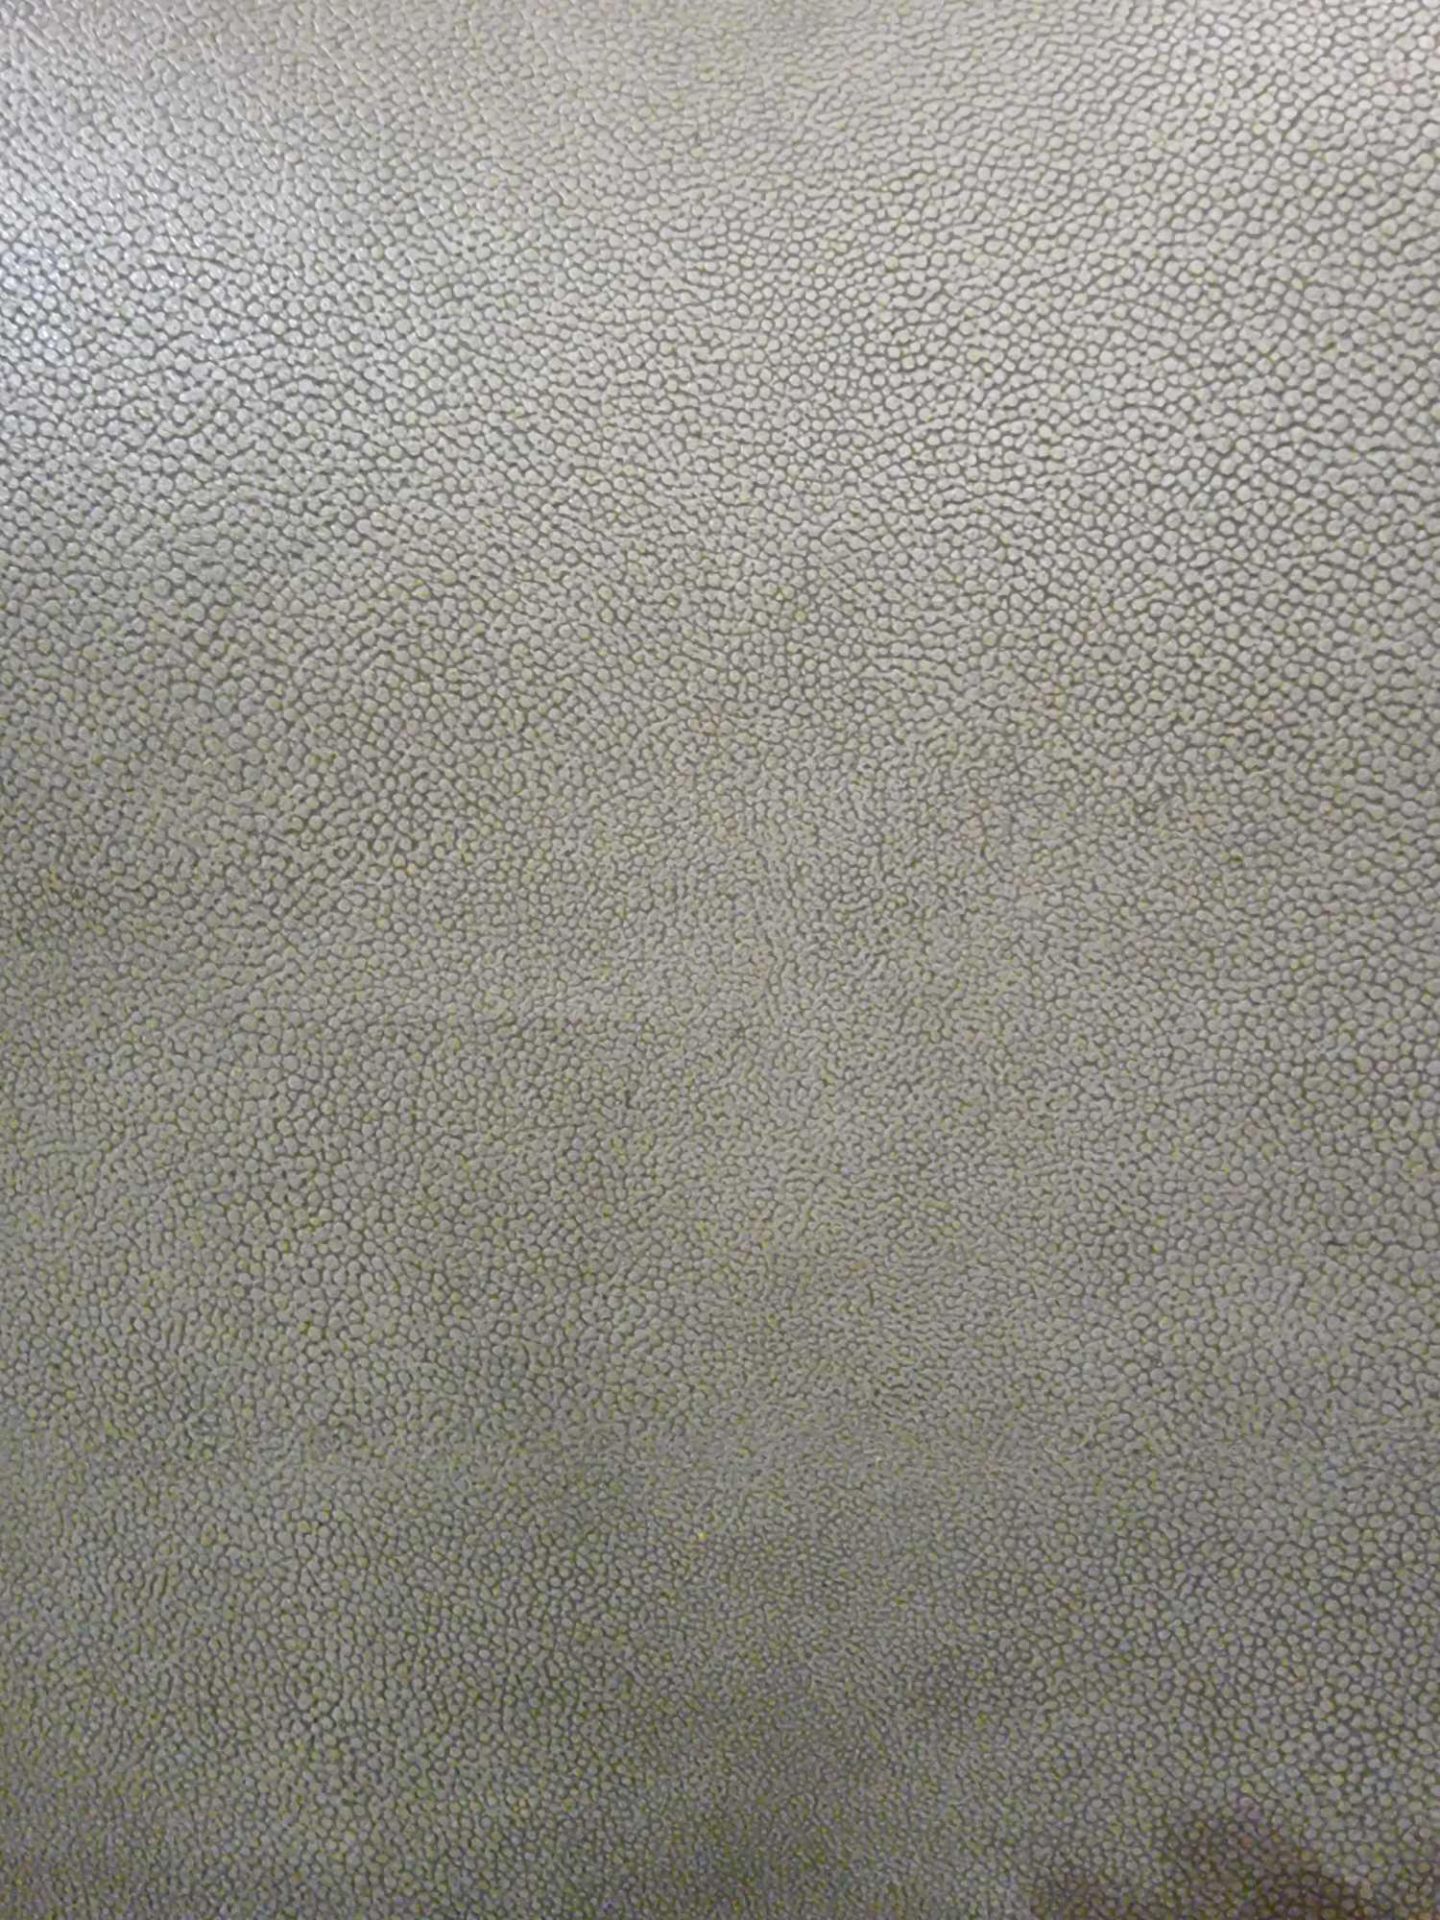 Sage Leather Hide approximately 4.86mÂ² 2.7 x 1.8cm - Image 2 of 2